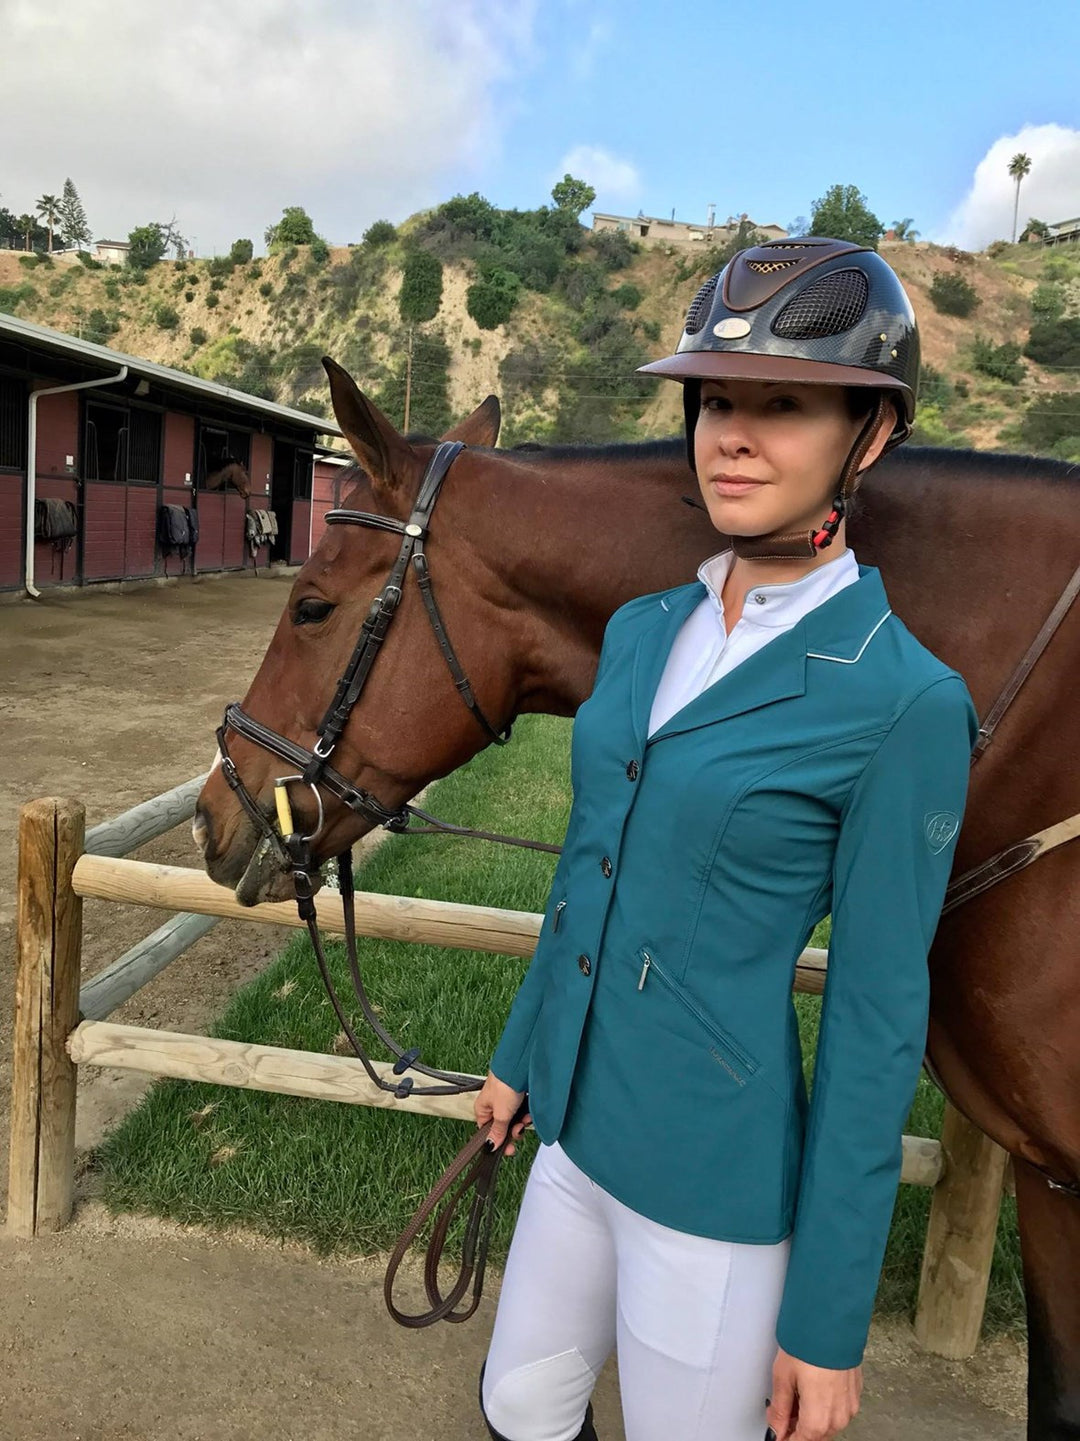 Inspirational people: equestrian style by Jennifer Sims